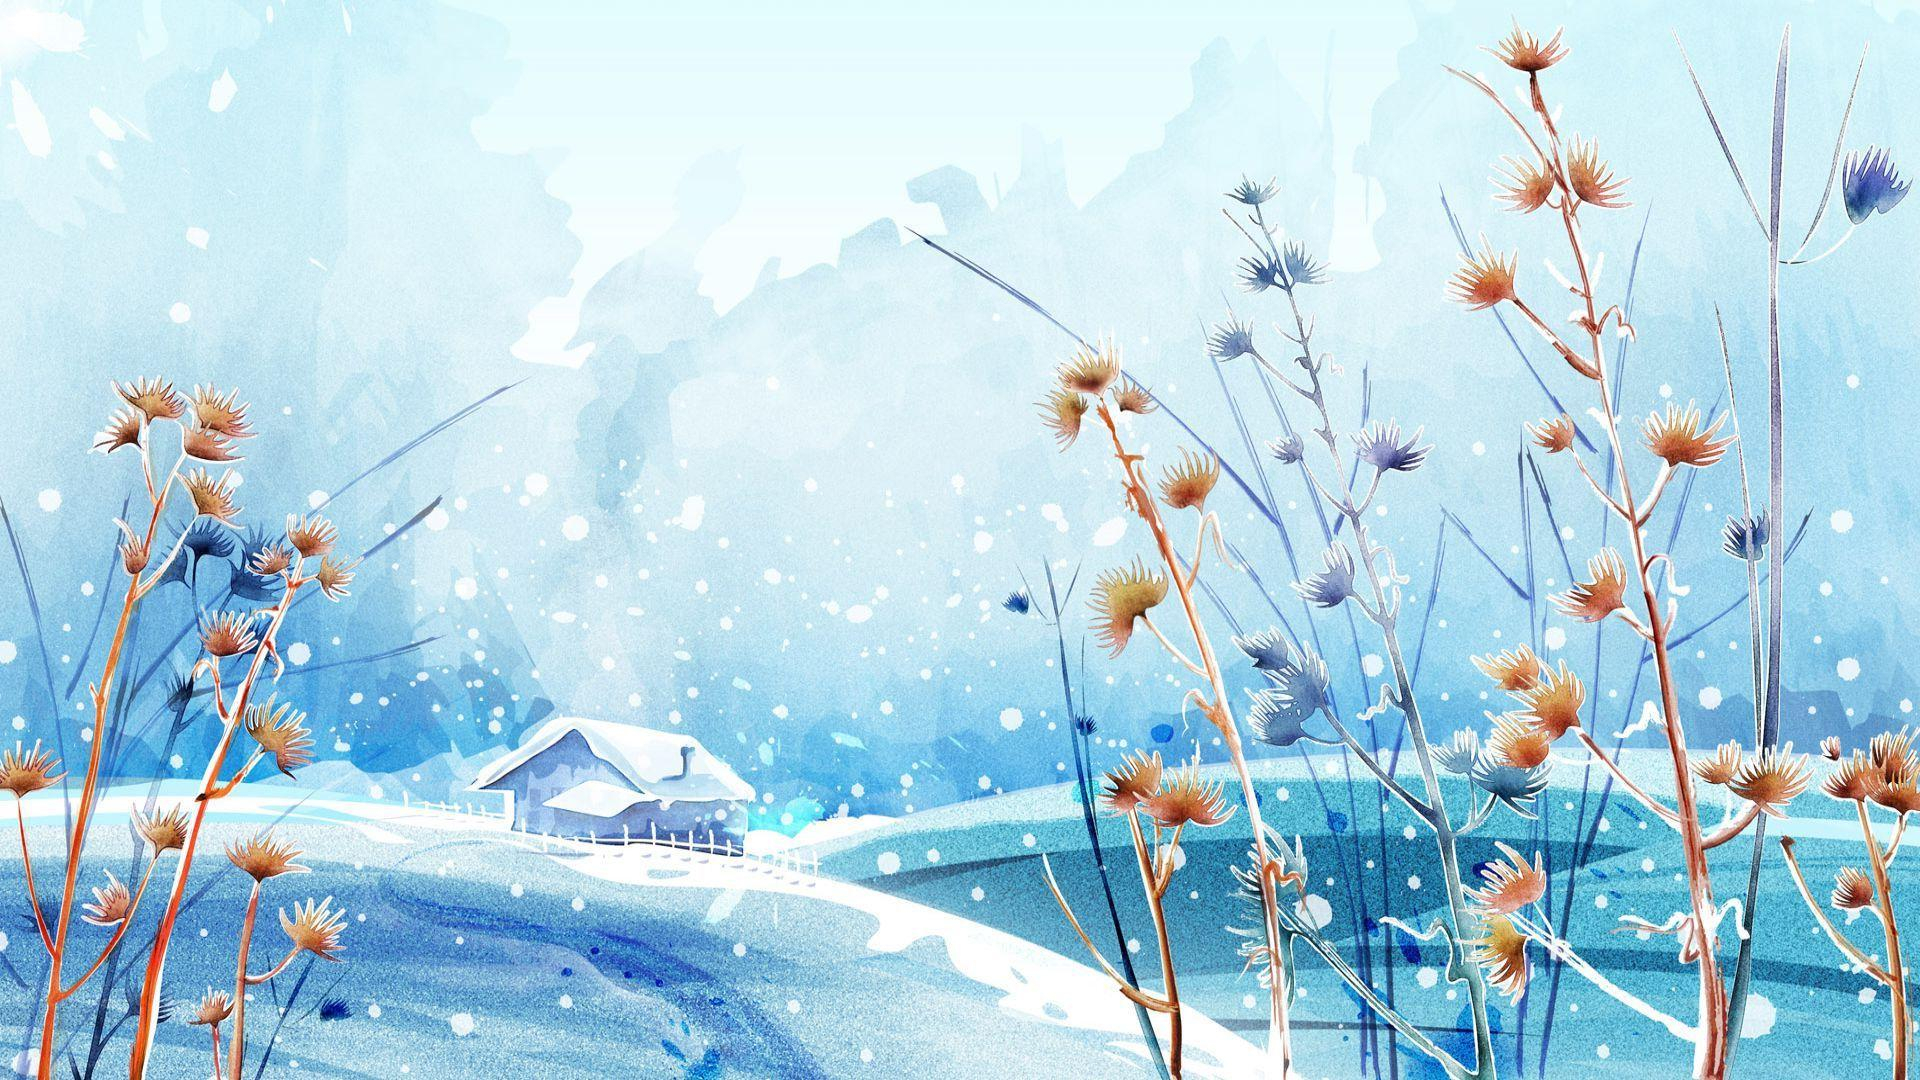 1920x1080 Anime Winter Scenery Wallpapers